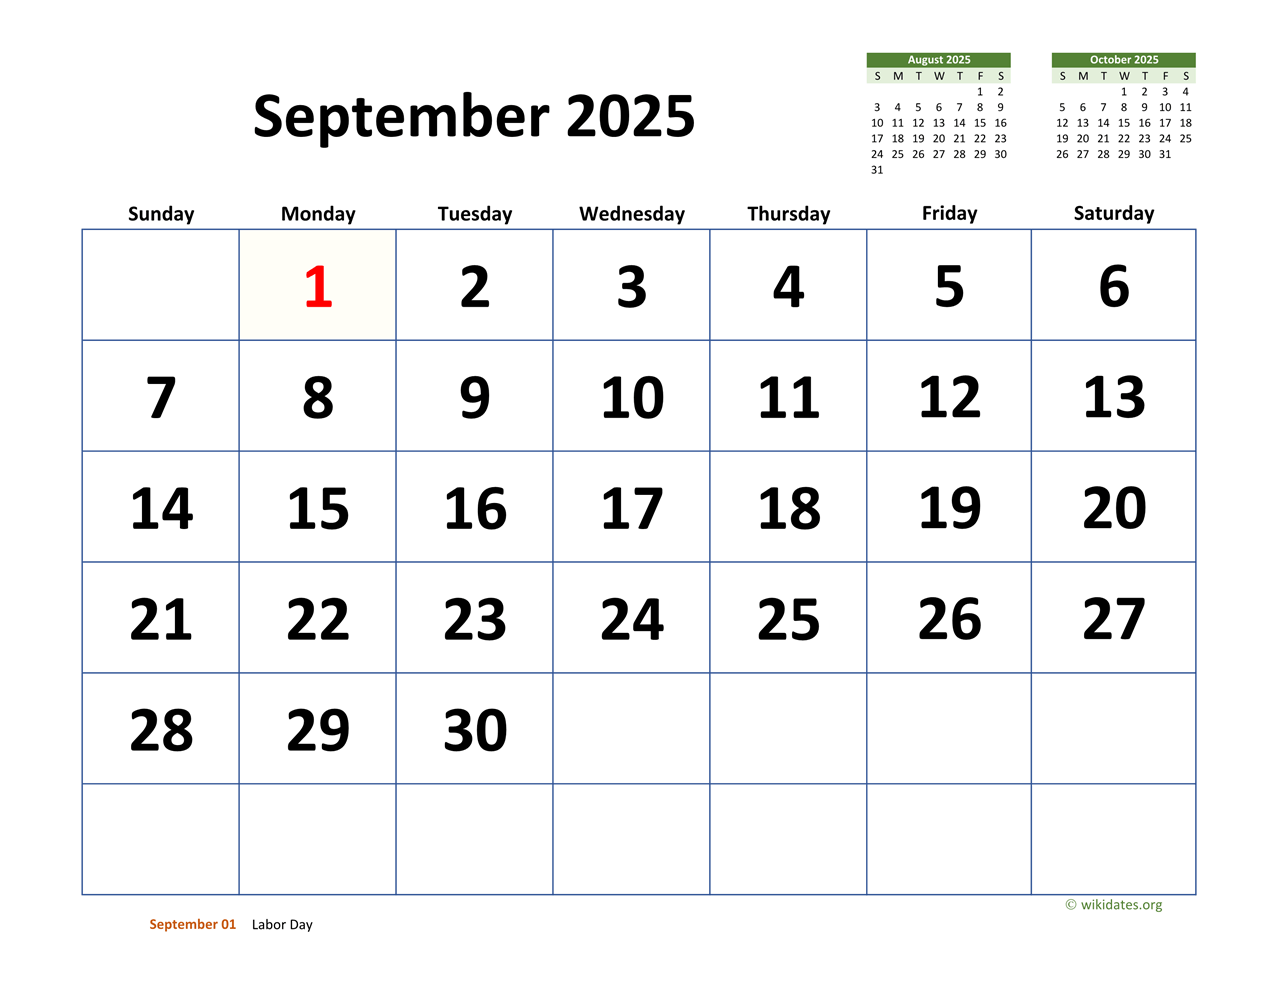 September 2025 Calendar with Extralarge Dates